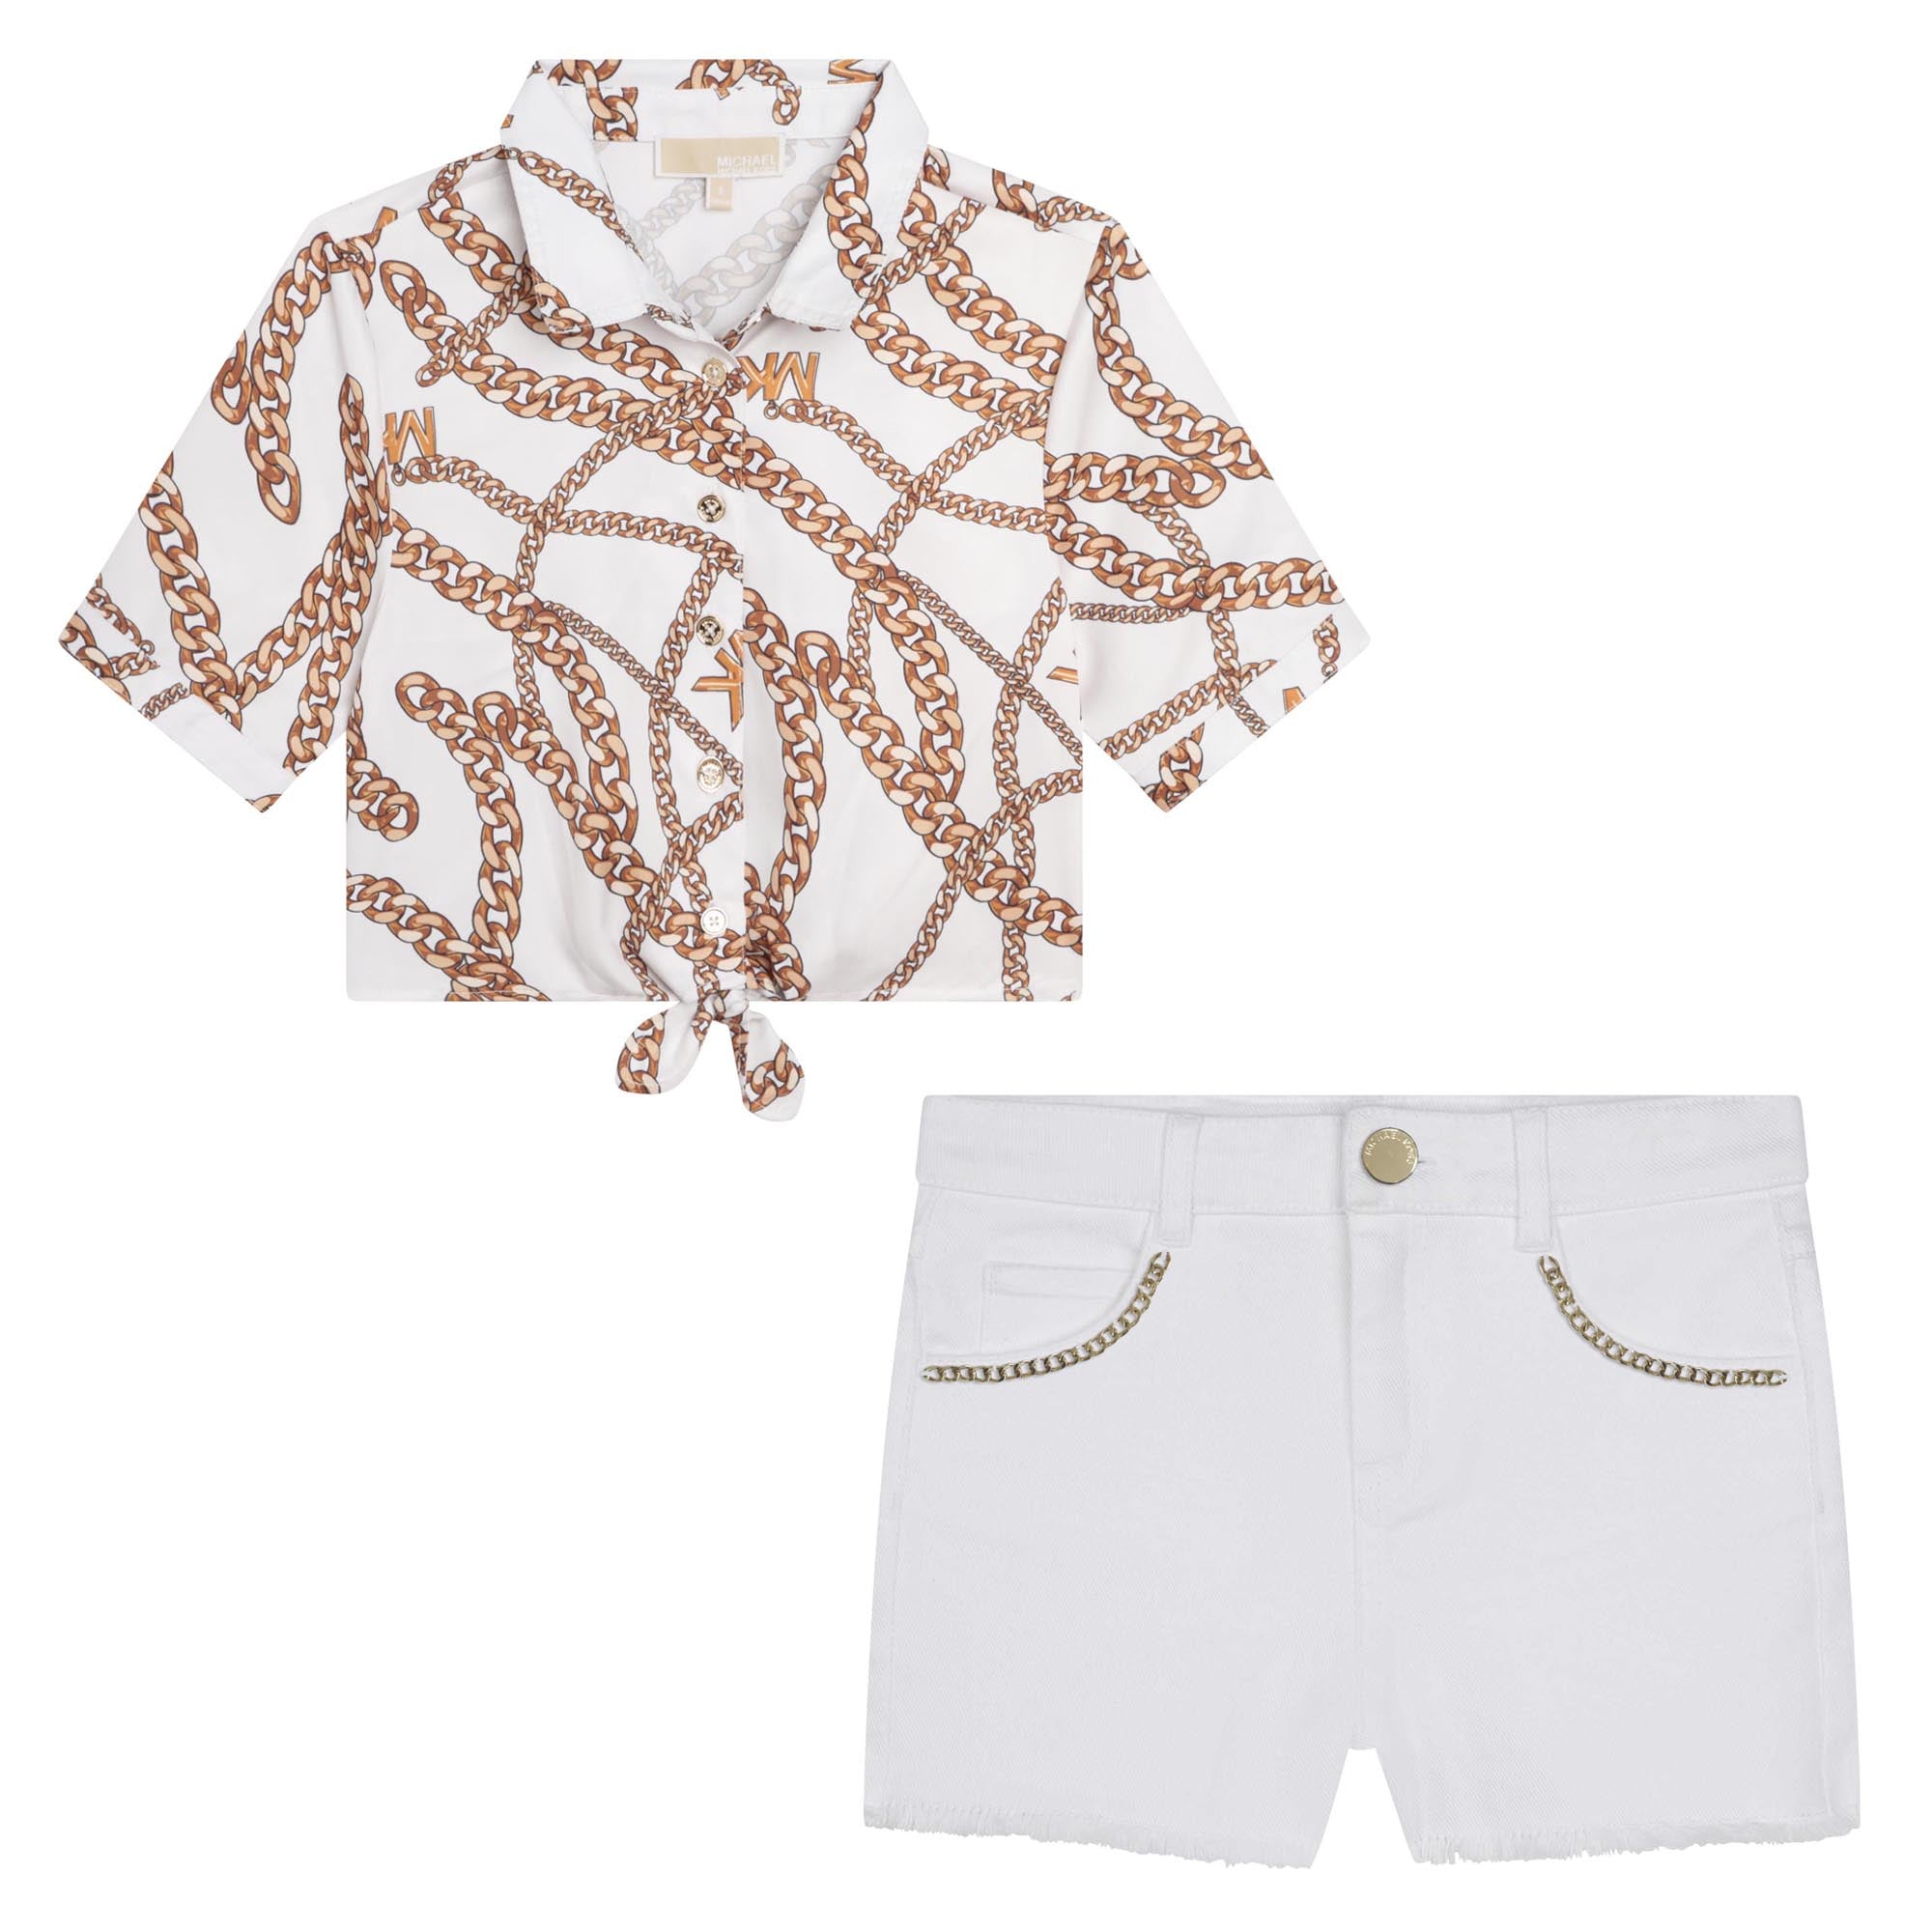 Michael Kors Chain Top and Shorts